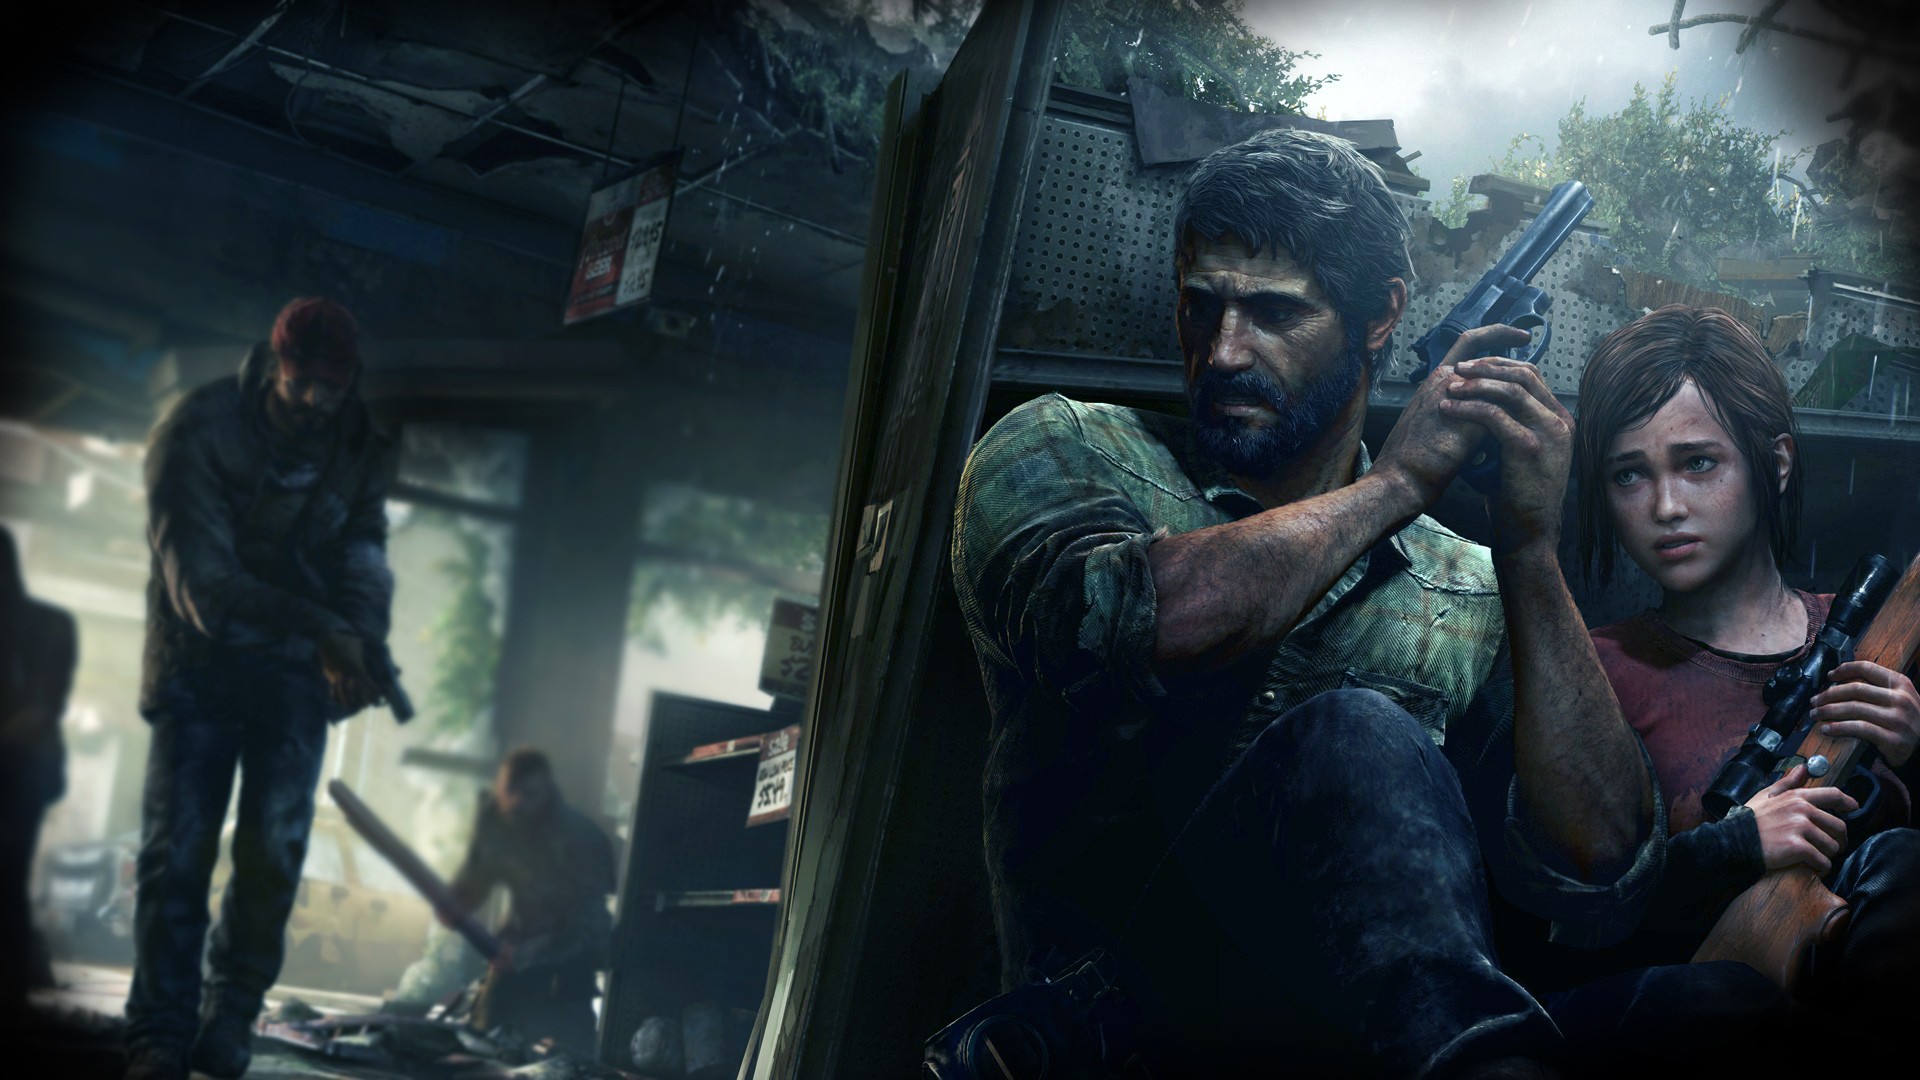 Delayed games - the last of us